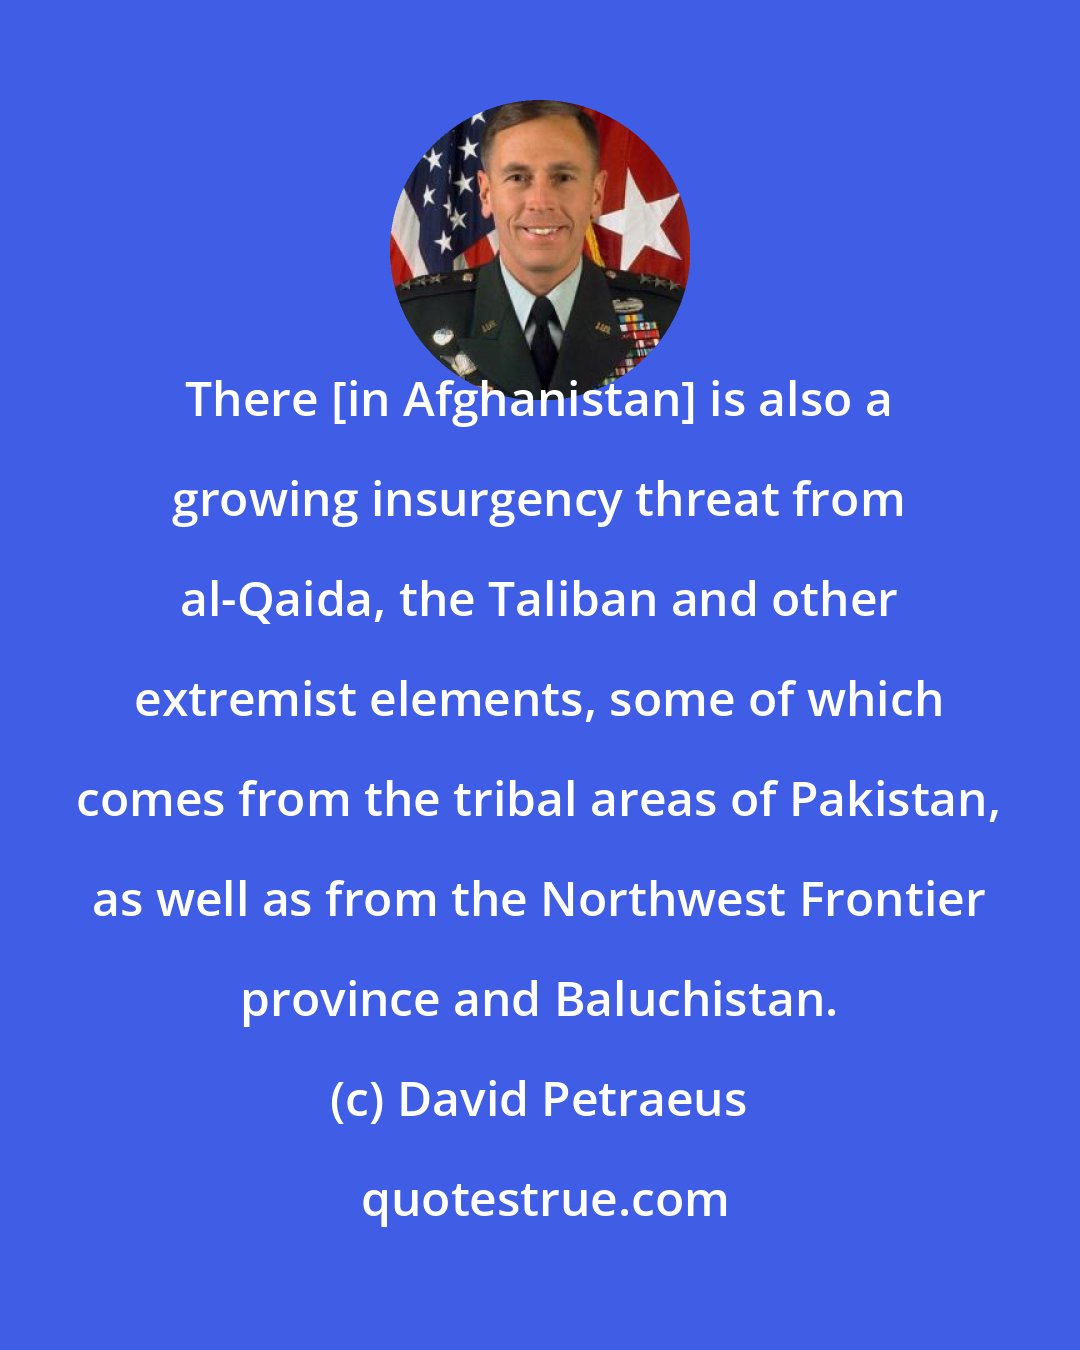 David Petraeus: There [in Afghanistan] is also a growing insurgency threat from al-Qaida, the Taliban and other extremist elements, some of which comes from the tribal areas of Pakistan, as well as from the Northwest Frontier province and Baluchistan.